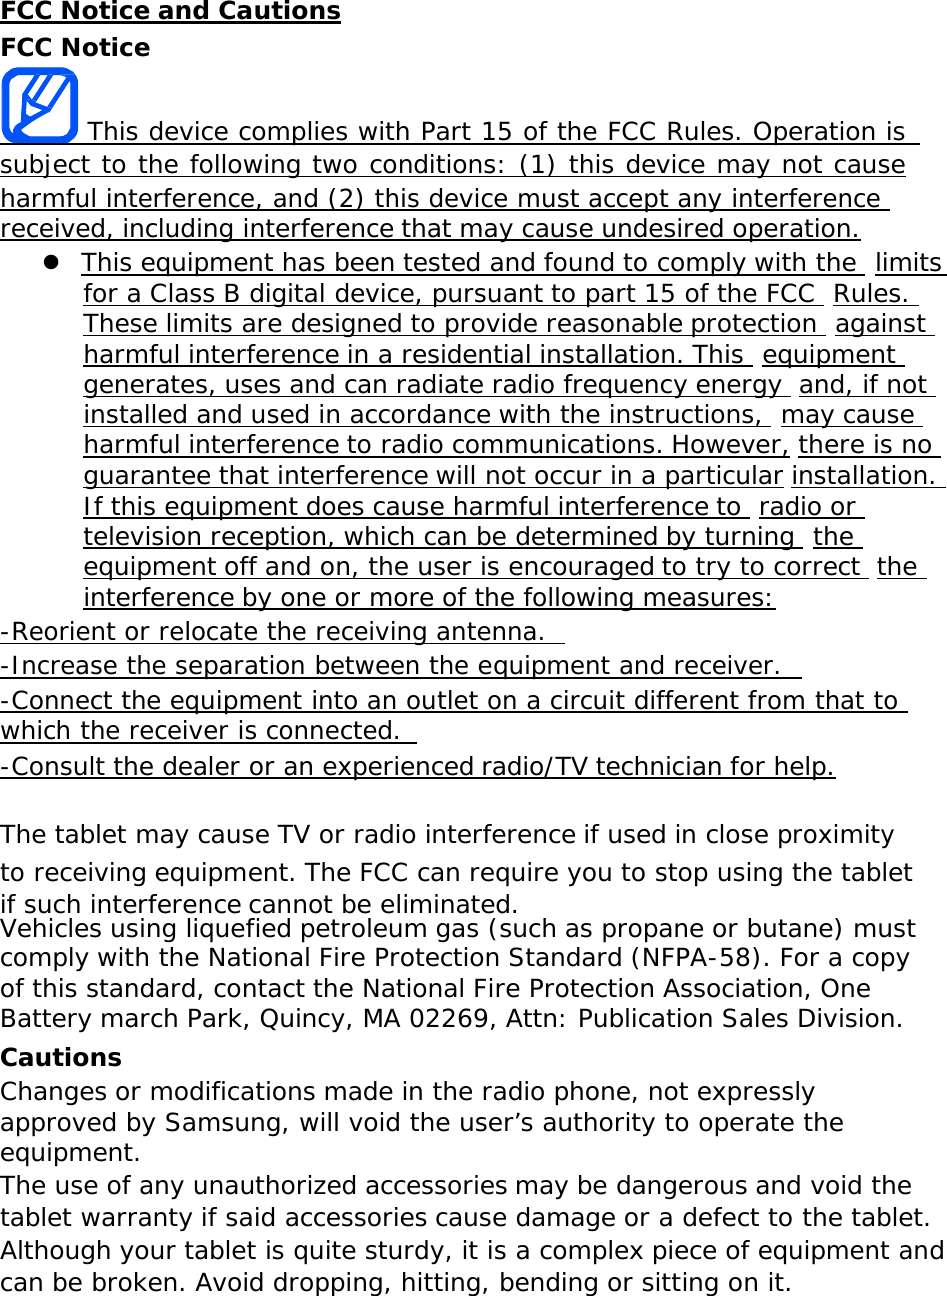 FCC Notice and Cautions FCC Notice This device complies with Part 15 of the FCC Rules. Operation is subject to the following two conditions: (1) this device may not cause harmful interference, and (2) this device must accept any interference  received, including interference that may cause undesired operation. This equipment has been tested and found to comply with the  limitsfor a Class B digital device, pursuant to part 15 of the FCC  Rules.These limits are designed to provide reasonable protection  againstharmful interference in a residential installation. This  equipmentgenerates, uses and can radiate radio frequency energy  and, if notinstalled and used in accordance with the instructions,  may causeharmful interference to radio communications. However, there is noguarantee that interference will not occur in a particular installation.If this equipment does cause harmful interference to  radio ortelevision reception, which can be determined by turning  theequipment off and on, the user is encouraged to try to correct  theinterference by one or more of the following measures: -Reorient or relocate the receiving antenna.   -Increase the separation between the equipment and receiver. -Connect the equipment into an outlet on a circuit different from that to which the receiver is connected.   -Consult the dealer or an experienced radio/TV technician for help. The tablet may cause TV or radio interference if used in close proximity to receiving equipment. The FCC can require you to stop using the tablet if such interference cannot be eliminated. Vehicles using liquefied petroleum gas (such as propane or butane) must comply with the National Fire Protection Standard (NFPA-58). For a copy of this standard, contact the National Fire Protection Association, One Battery march Park, Quincy, MA 02269, Attn: Publication Sales Division. Cautions Changes or modifications made in the radio phone, not expressly approved by Samsung, will void the user’s authority to operate the equipment. The use of any unauthorized accessories may be dangerous and void the tablet warranty if said accessories cause damage or a defect to the tablet. Although your tablet is quite sturdy, it is a complex piece of equipment and can be broken. Avoid dropping, hitting, bending or sitting on it. 